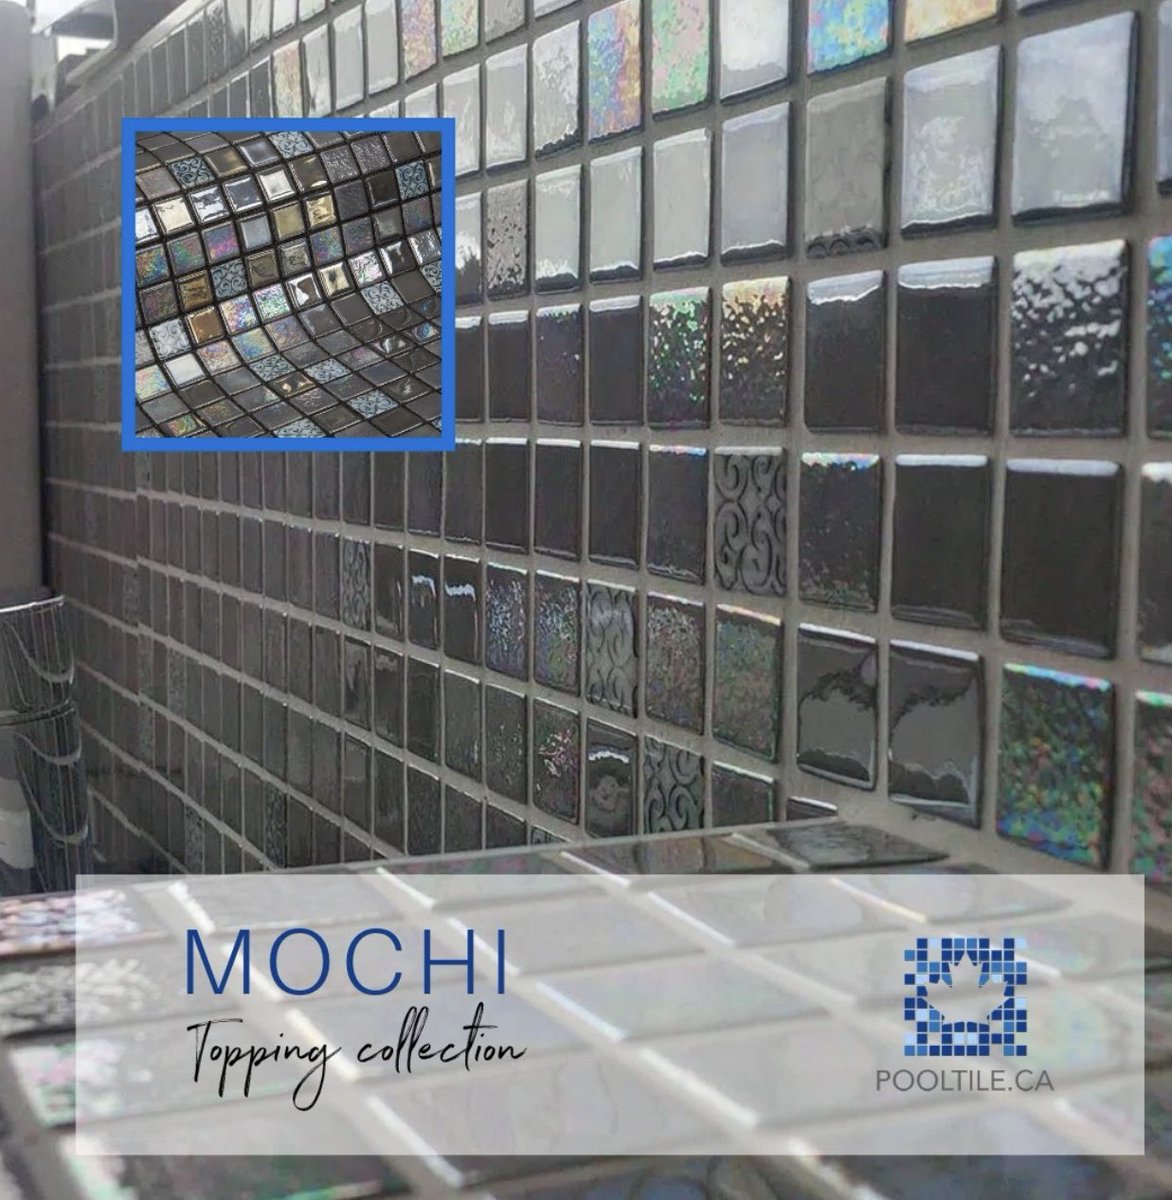 Ask us how you can add a sweet element to your swimming pool, spa, sauna, or wellness space with the Mochi pool tiles. #outdoorpool #indoorpool #tileideas #poolproducts #glowinthedark #poolcontractor